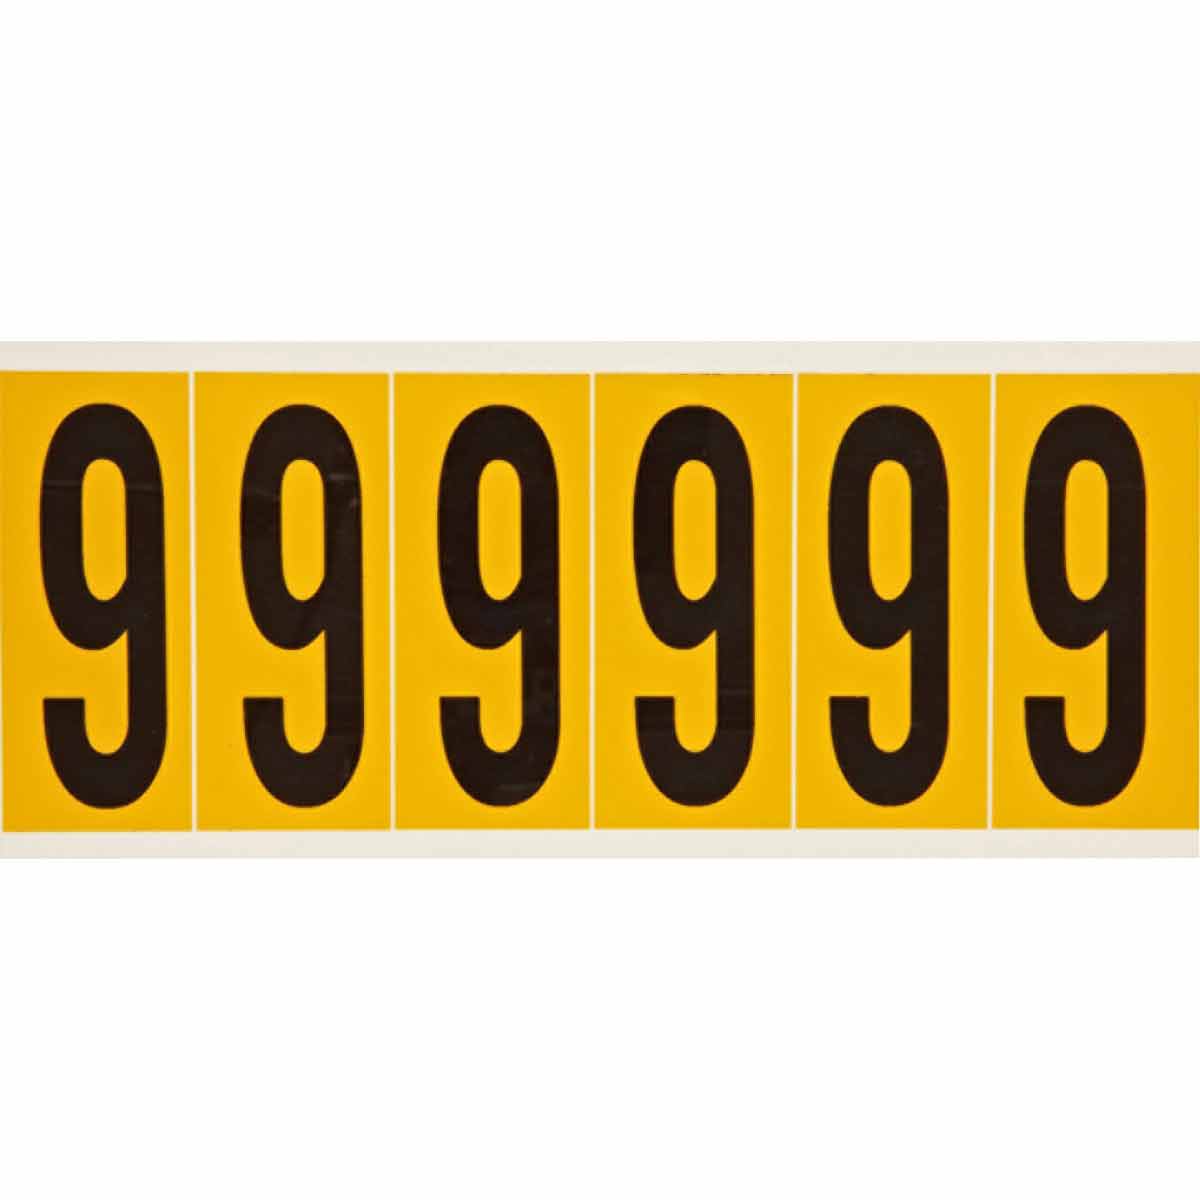 Brady® 1550-0 Non-Reflective Number Label, Black 0 Character, 2.938 in H, Yellow Background, B-946 Vinyl